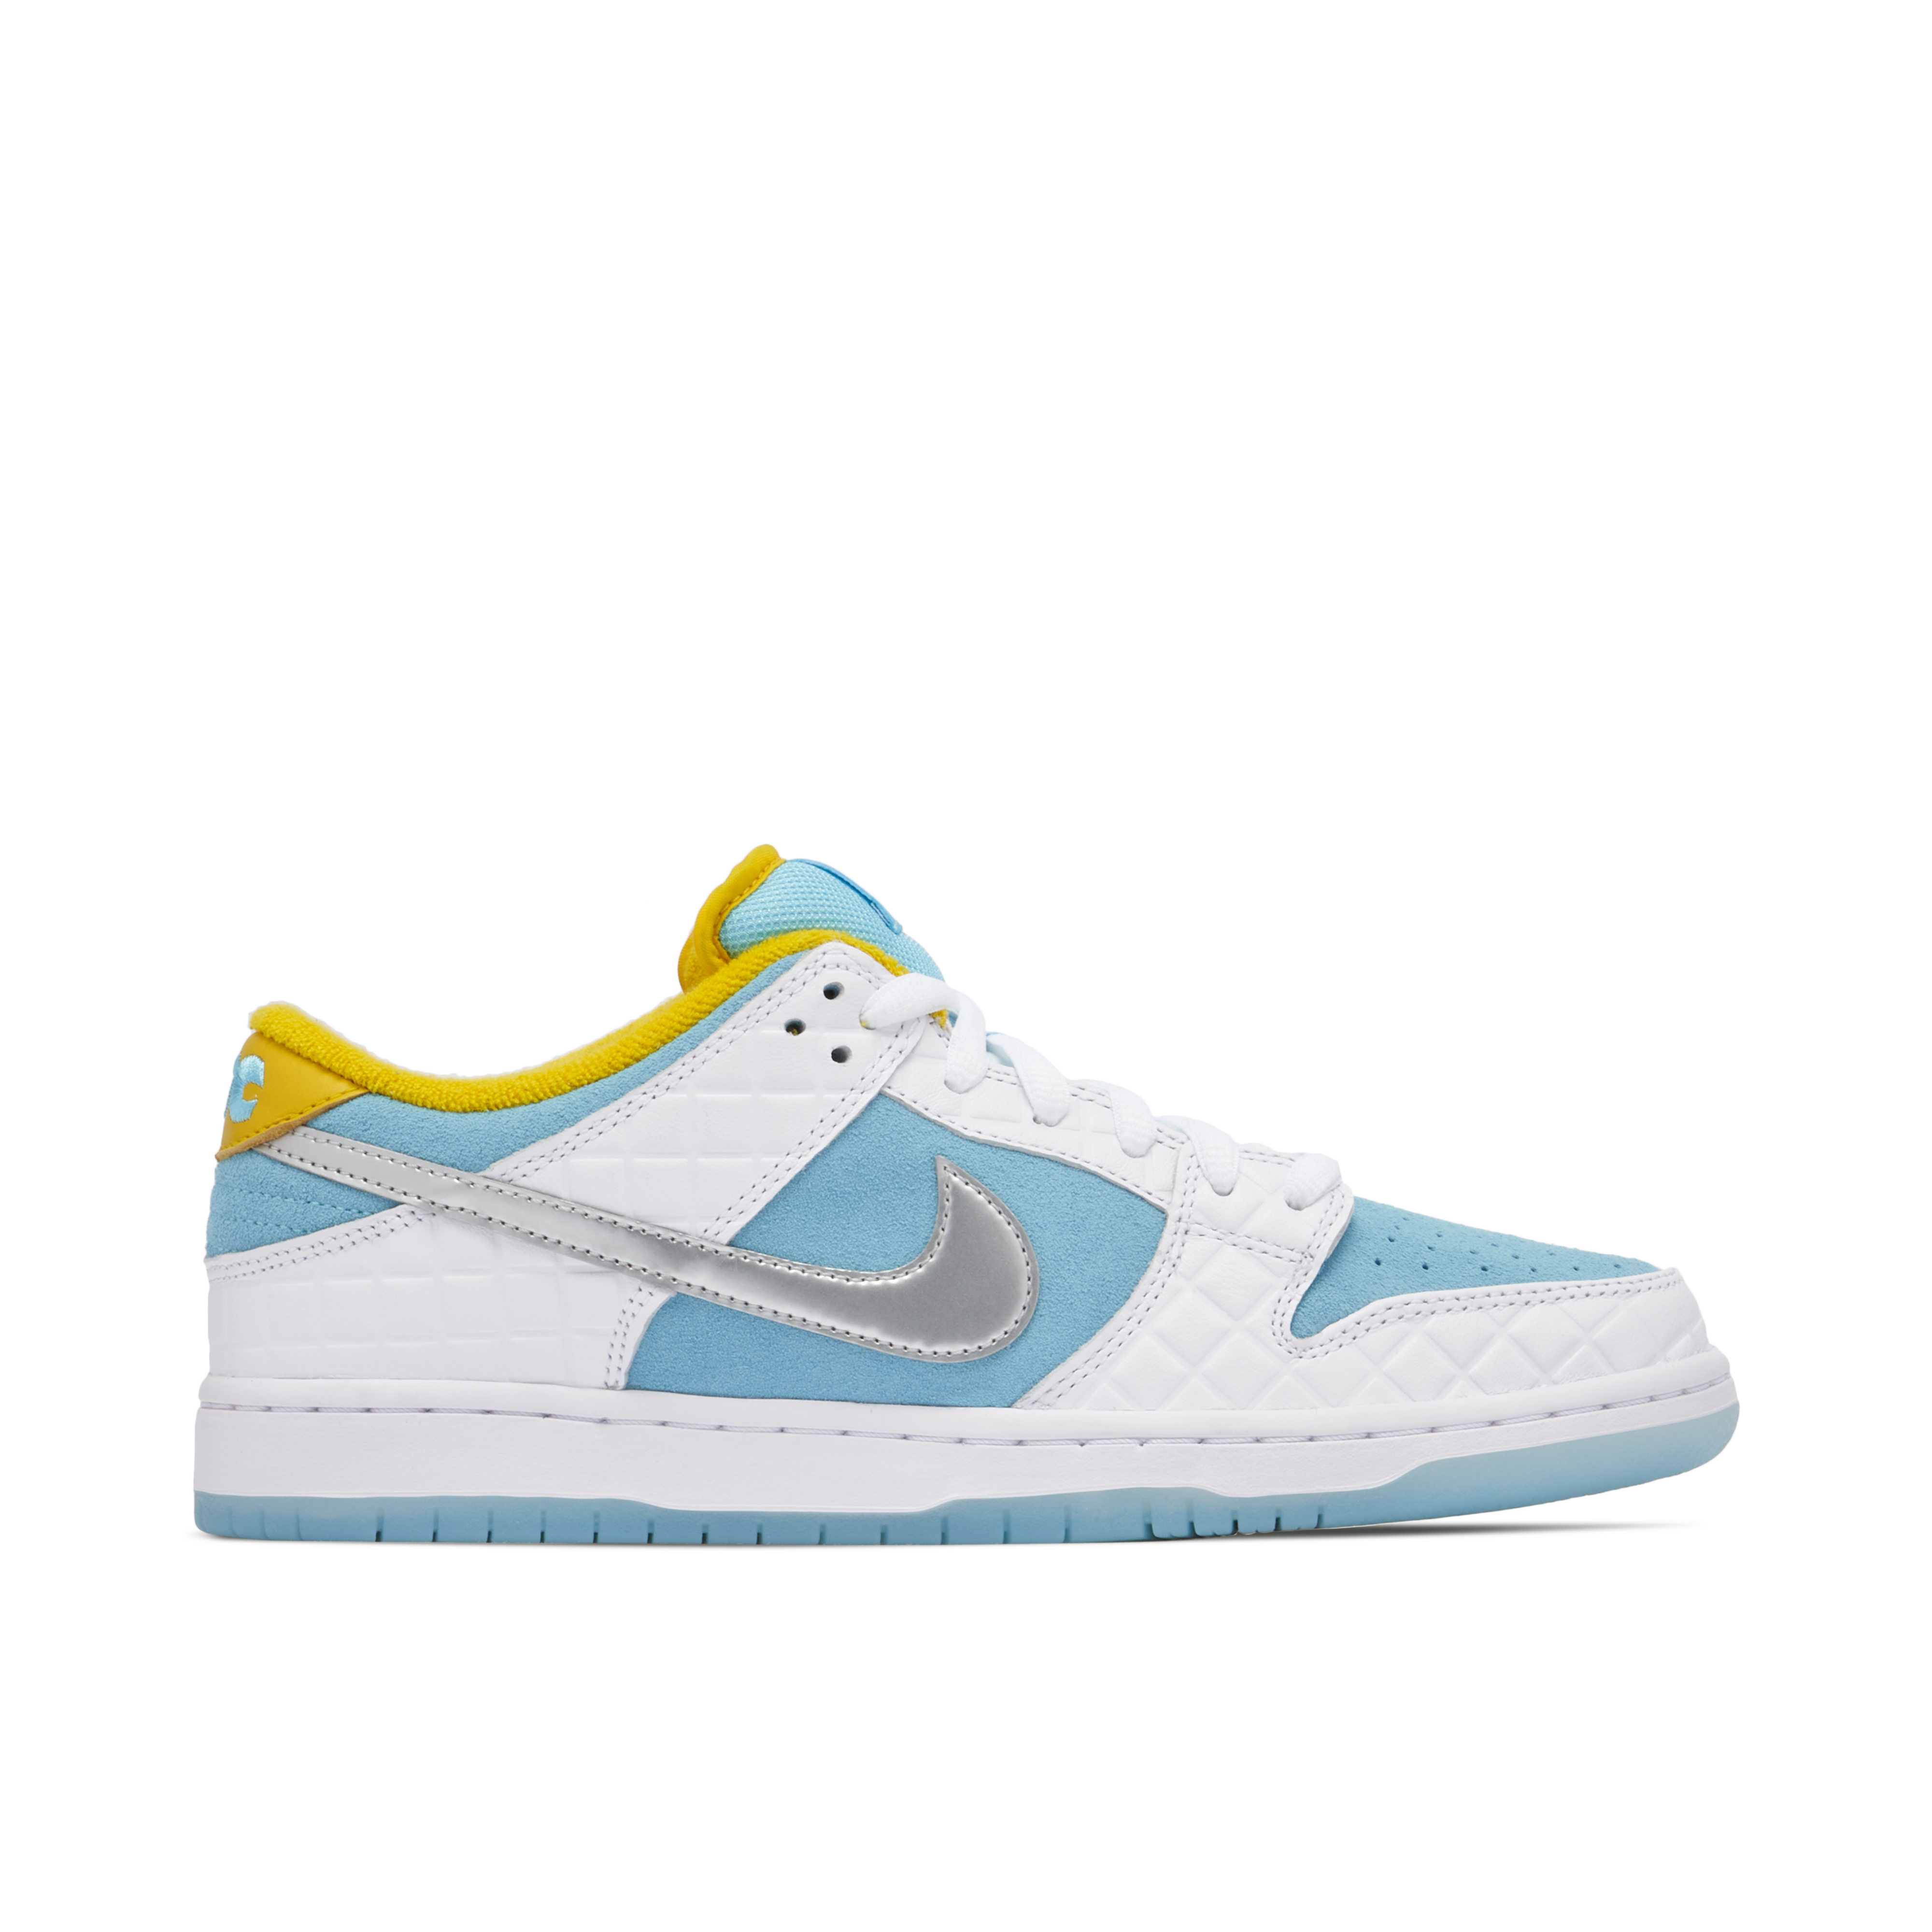 FTC x Nike Dunk Low SB Lagoon Pulse | DH7687-400 | Laced